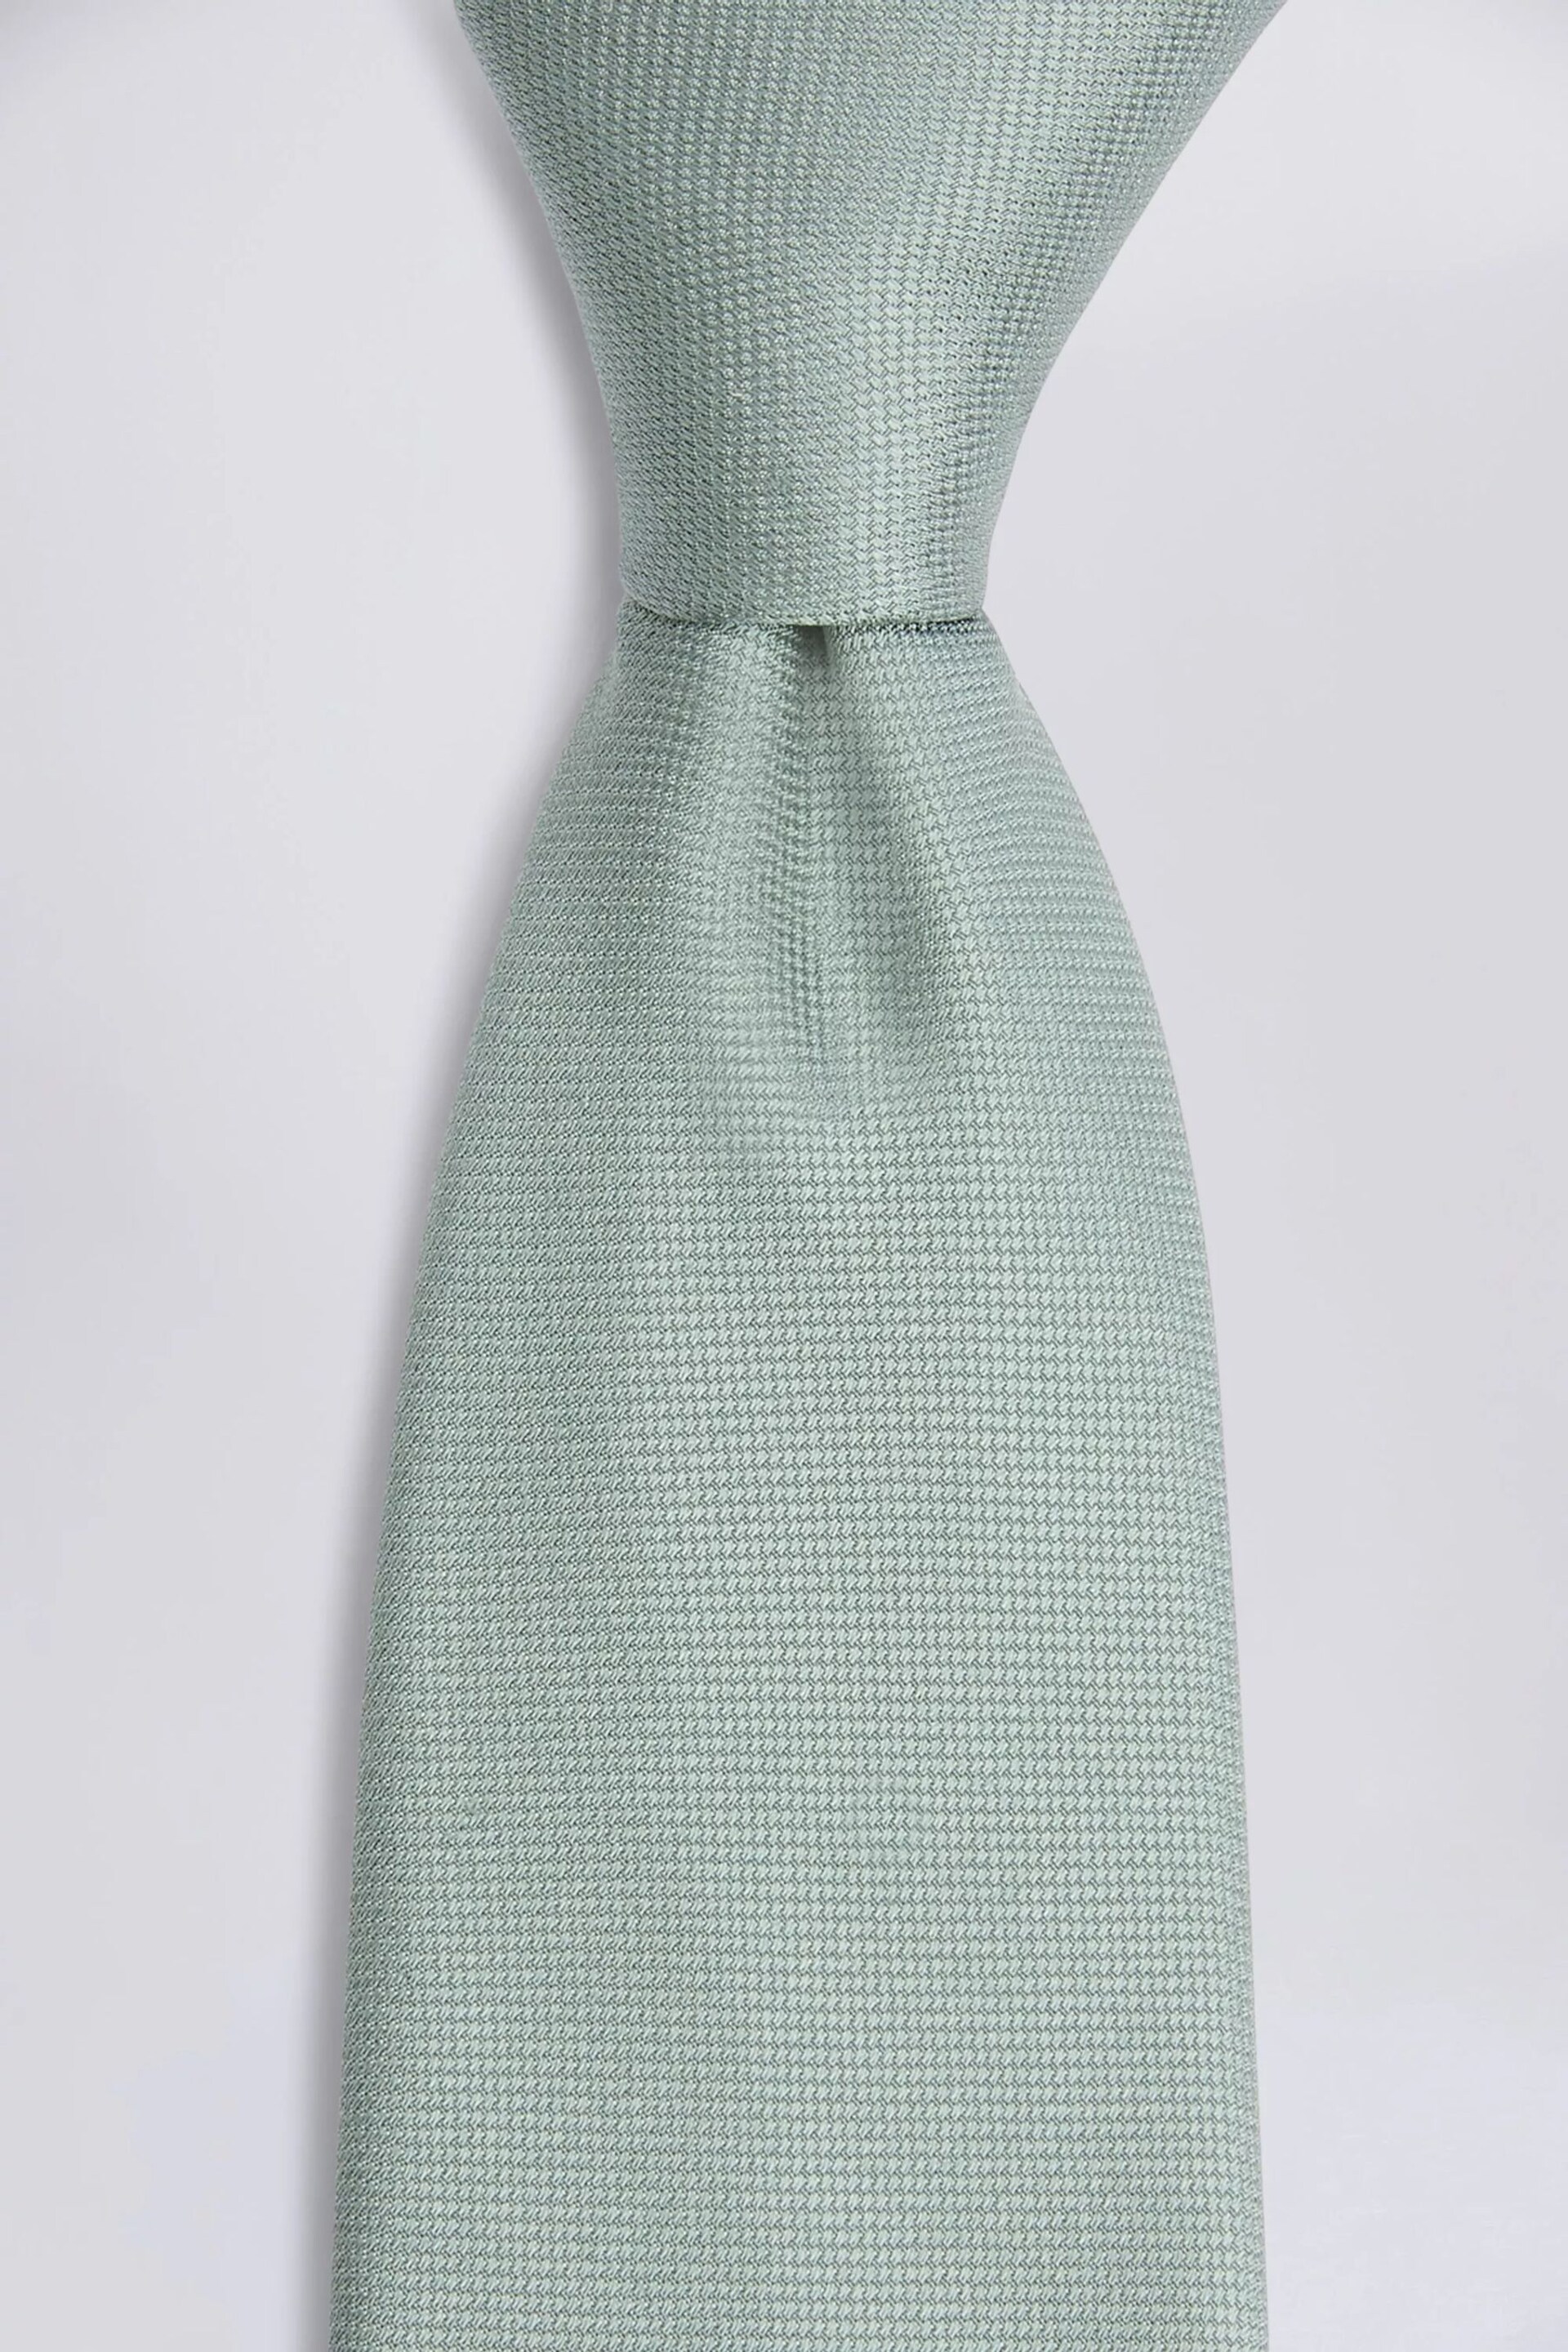 MOSS Green Oxford Silk Tie - Image 2 of 2